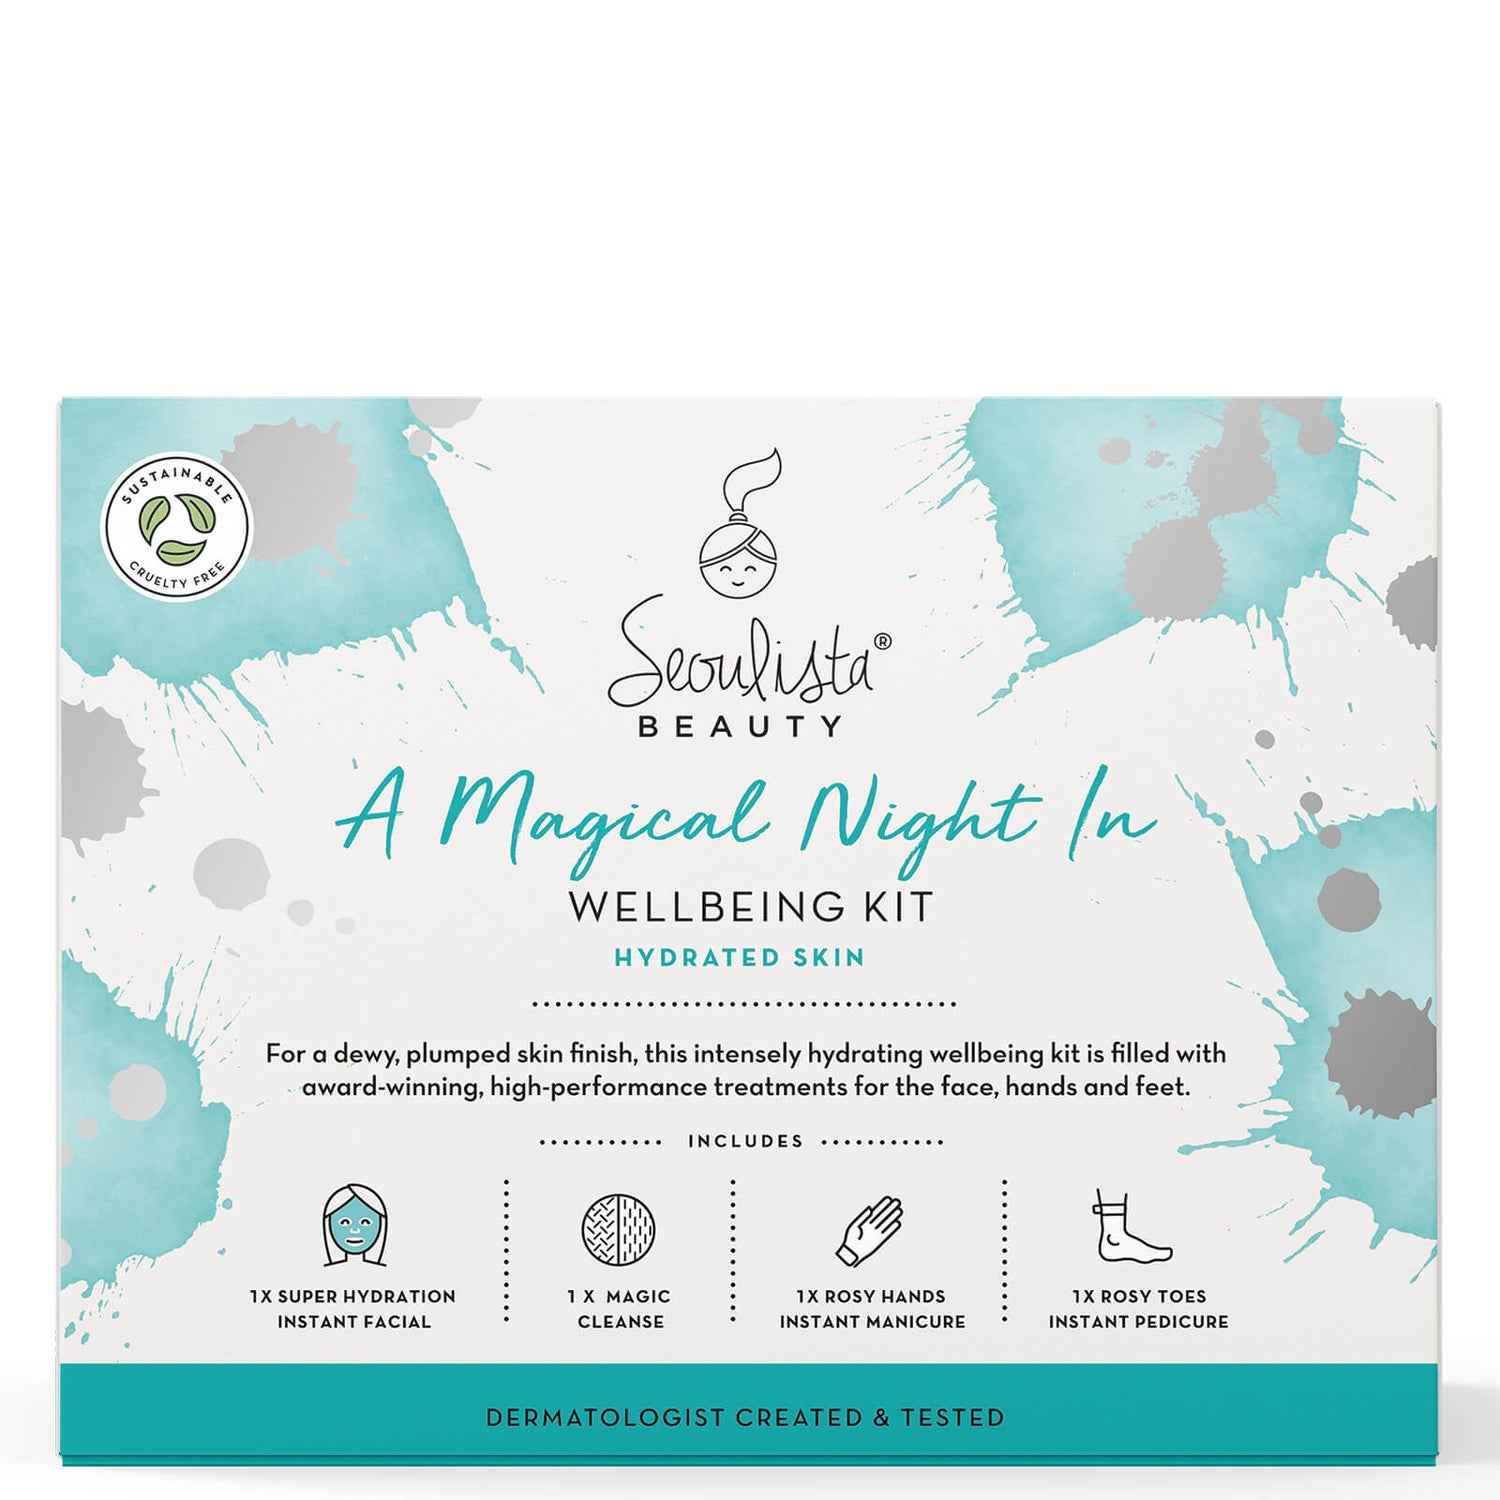 Seoulista Beauty A Magical Night In Wellbeing Kit - Ενυδατωμένη επιδερμίδα